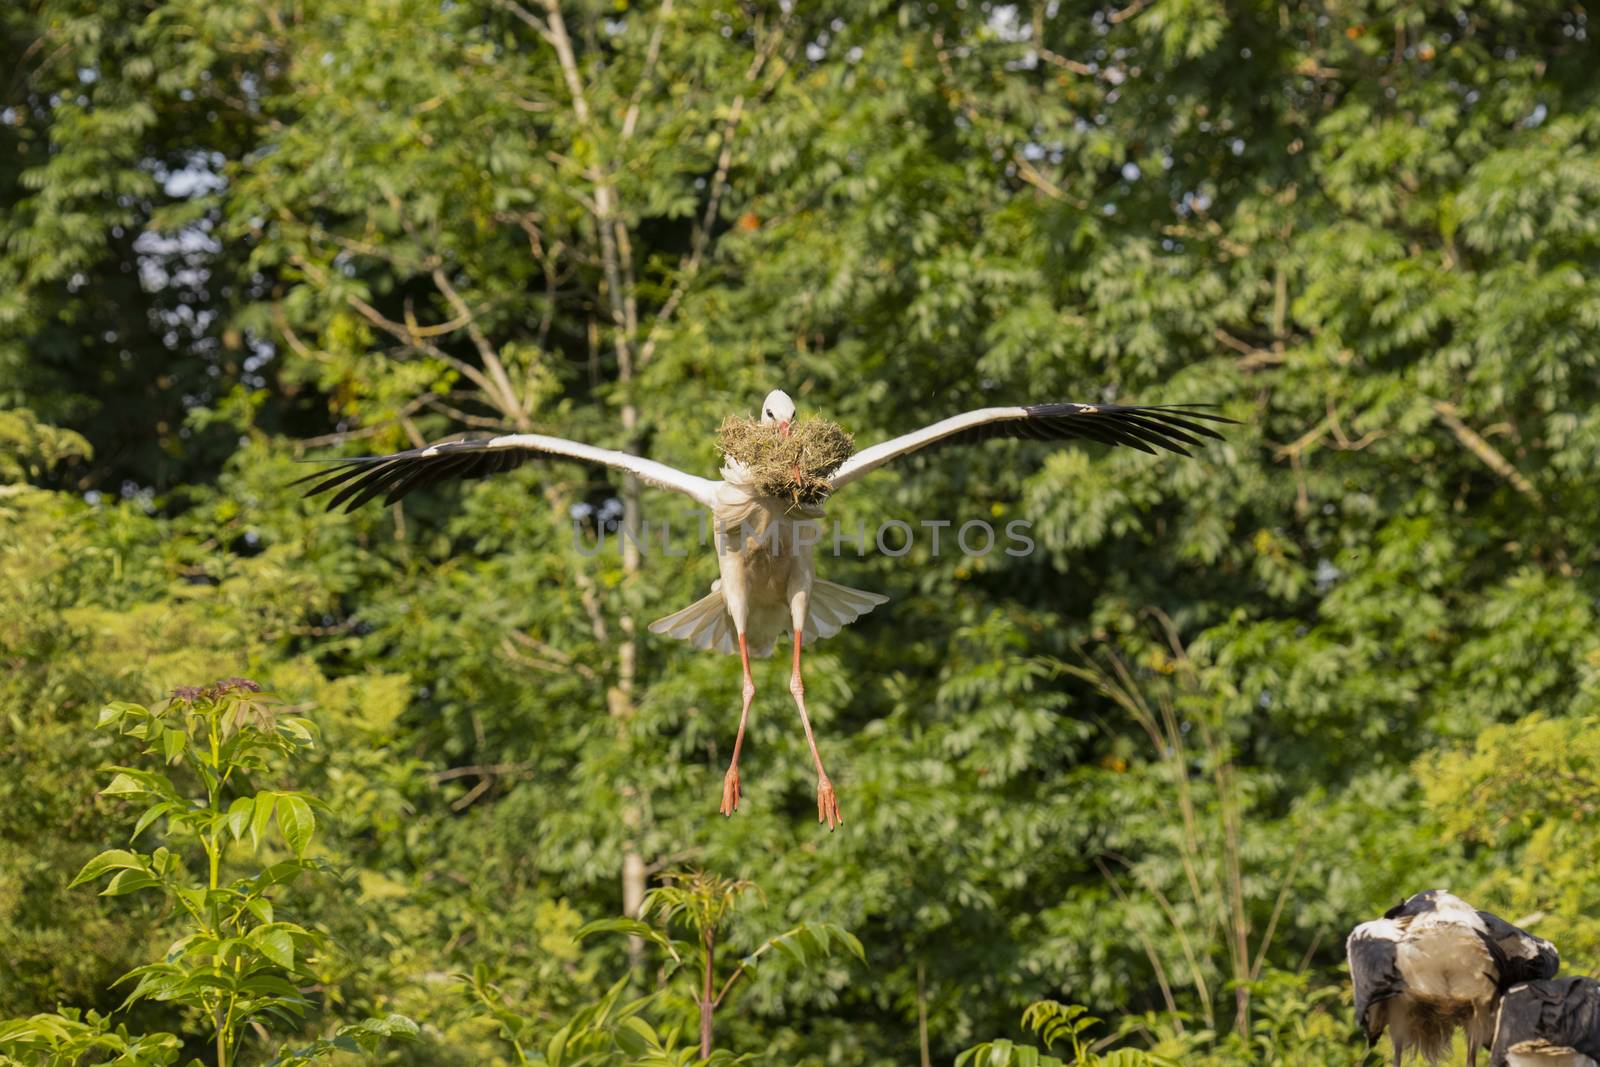 Stork flying with food for young